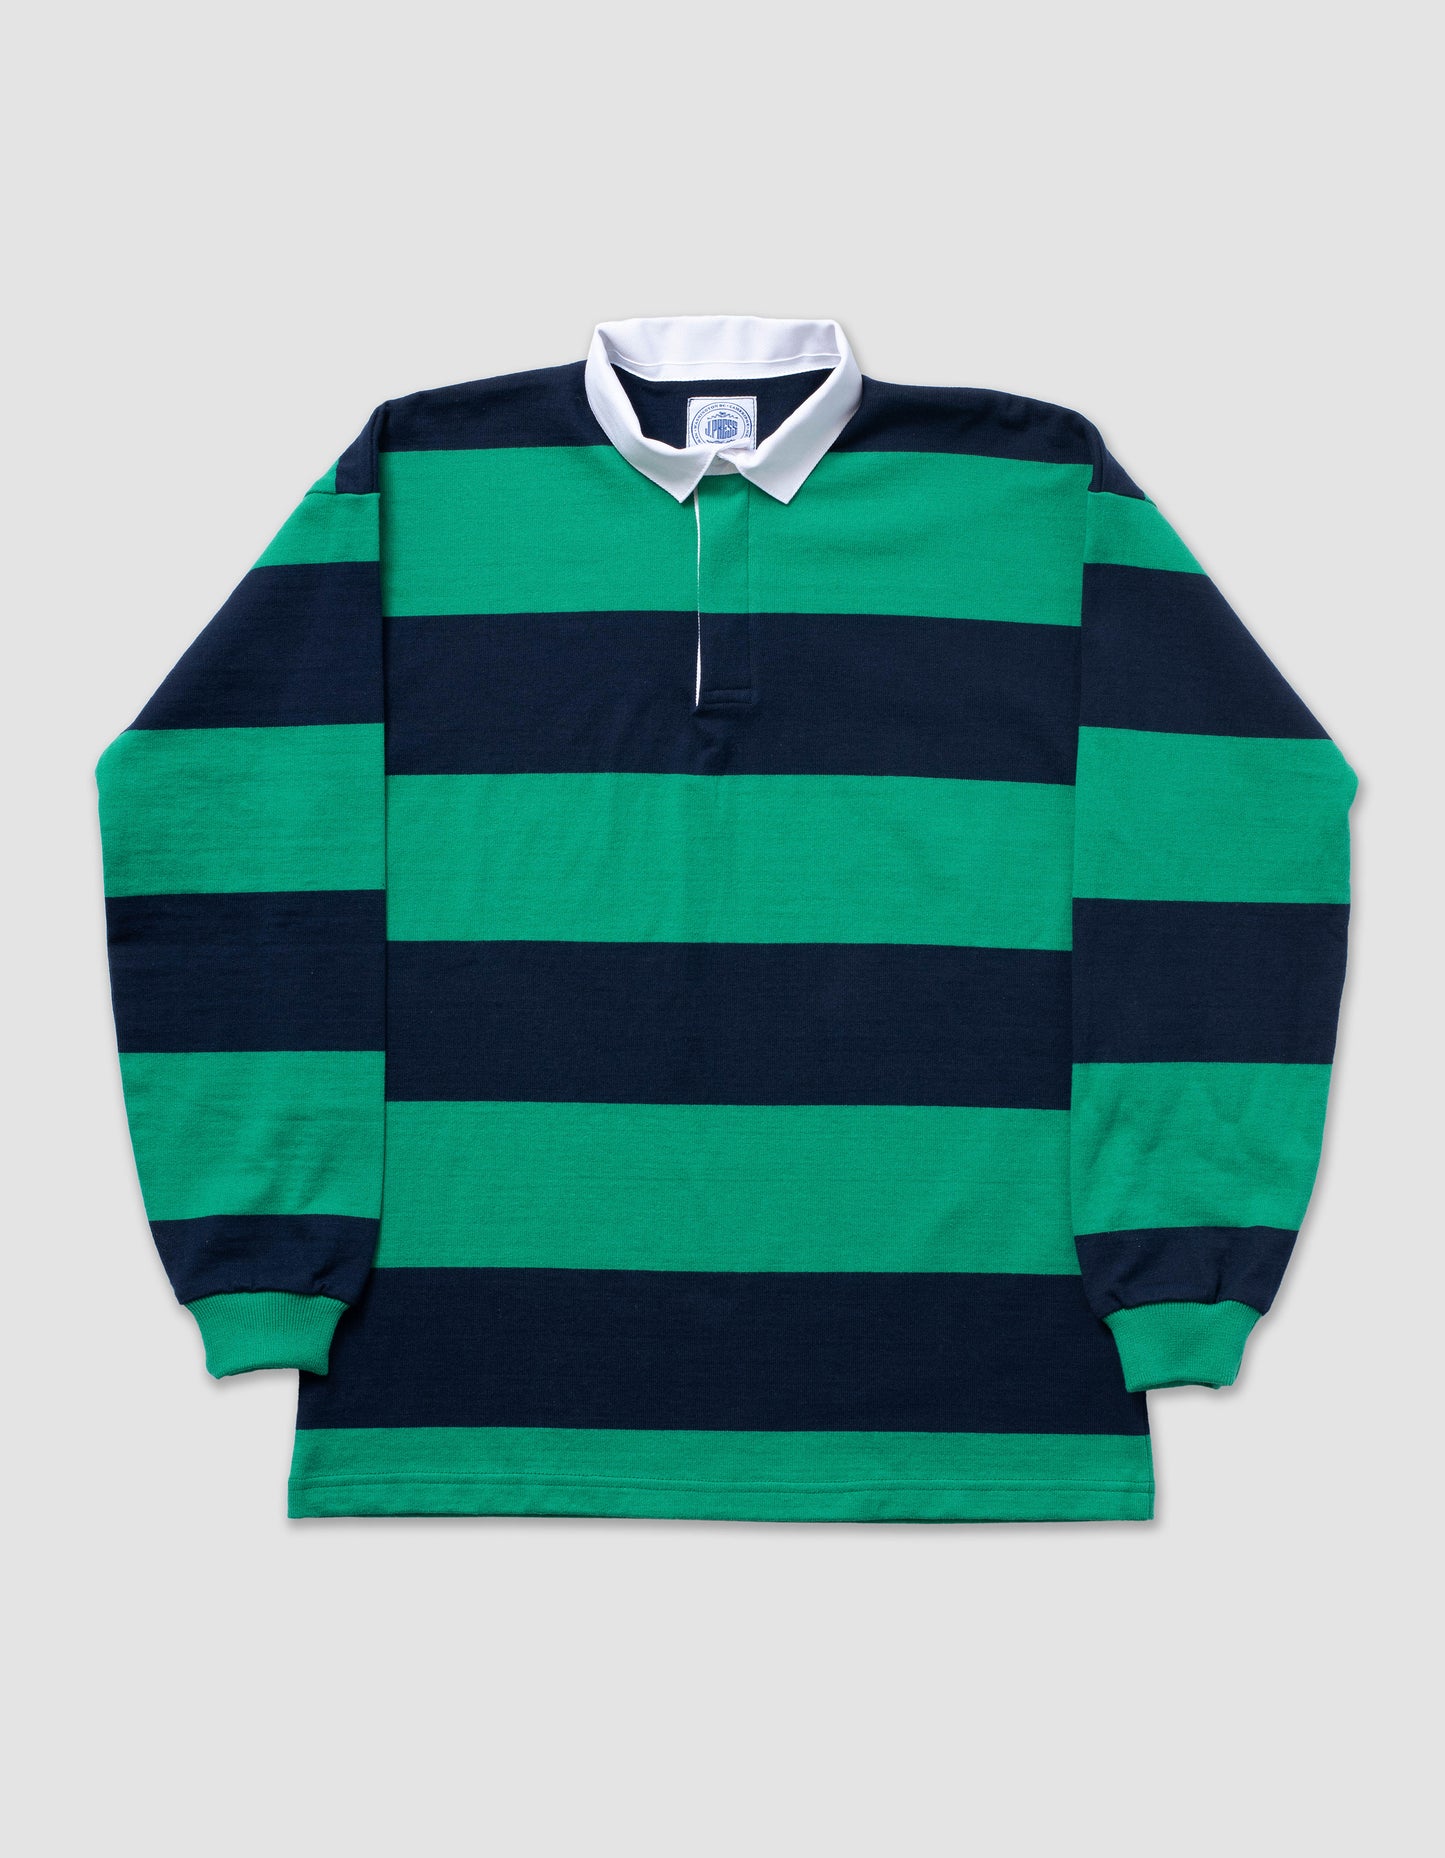 CLASSIC STRIPE RUGBY SHIRT - KELLY/NAVY